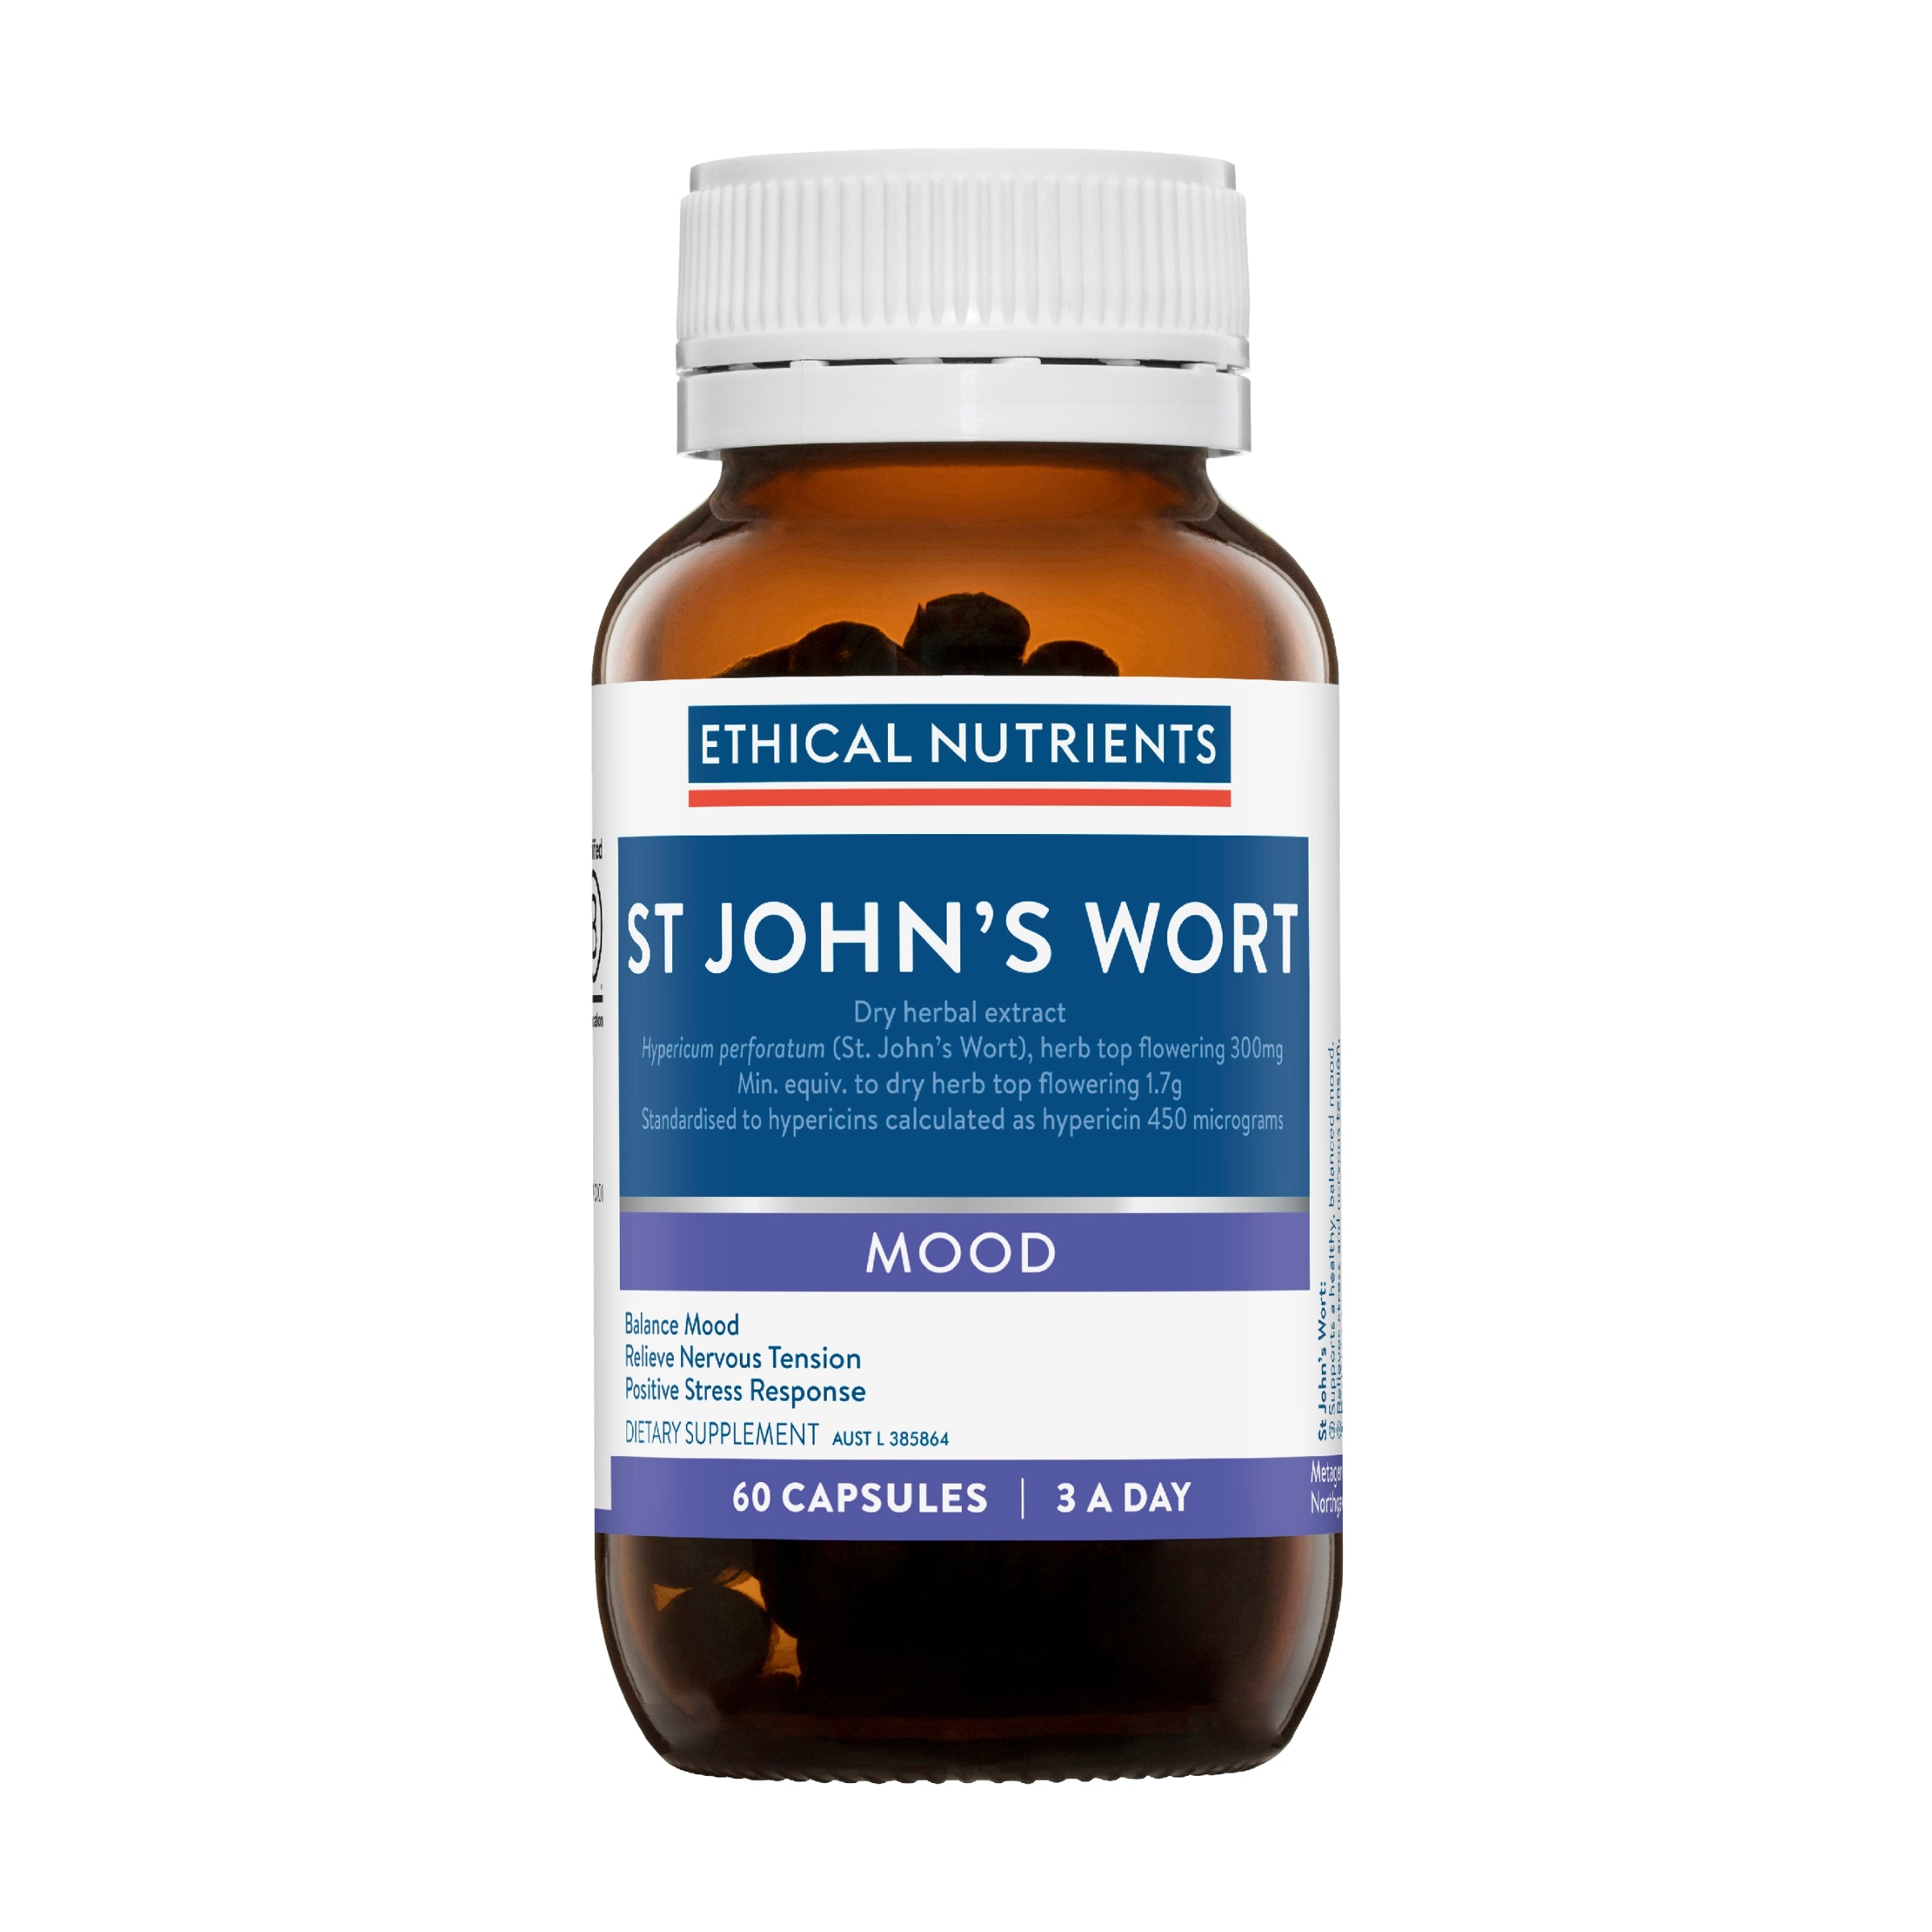 Ethical Nutrients St John's Wort 60 Capsules #size_60 capsules